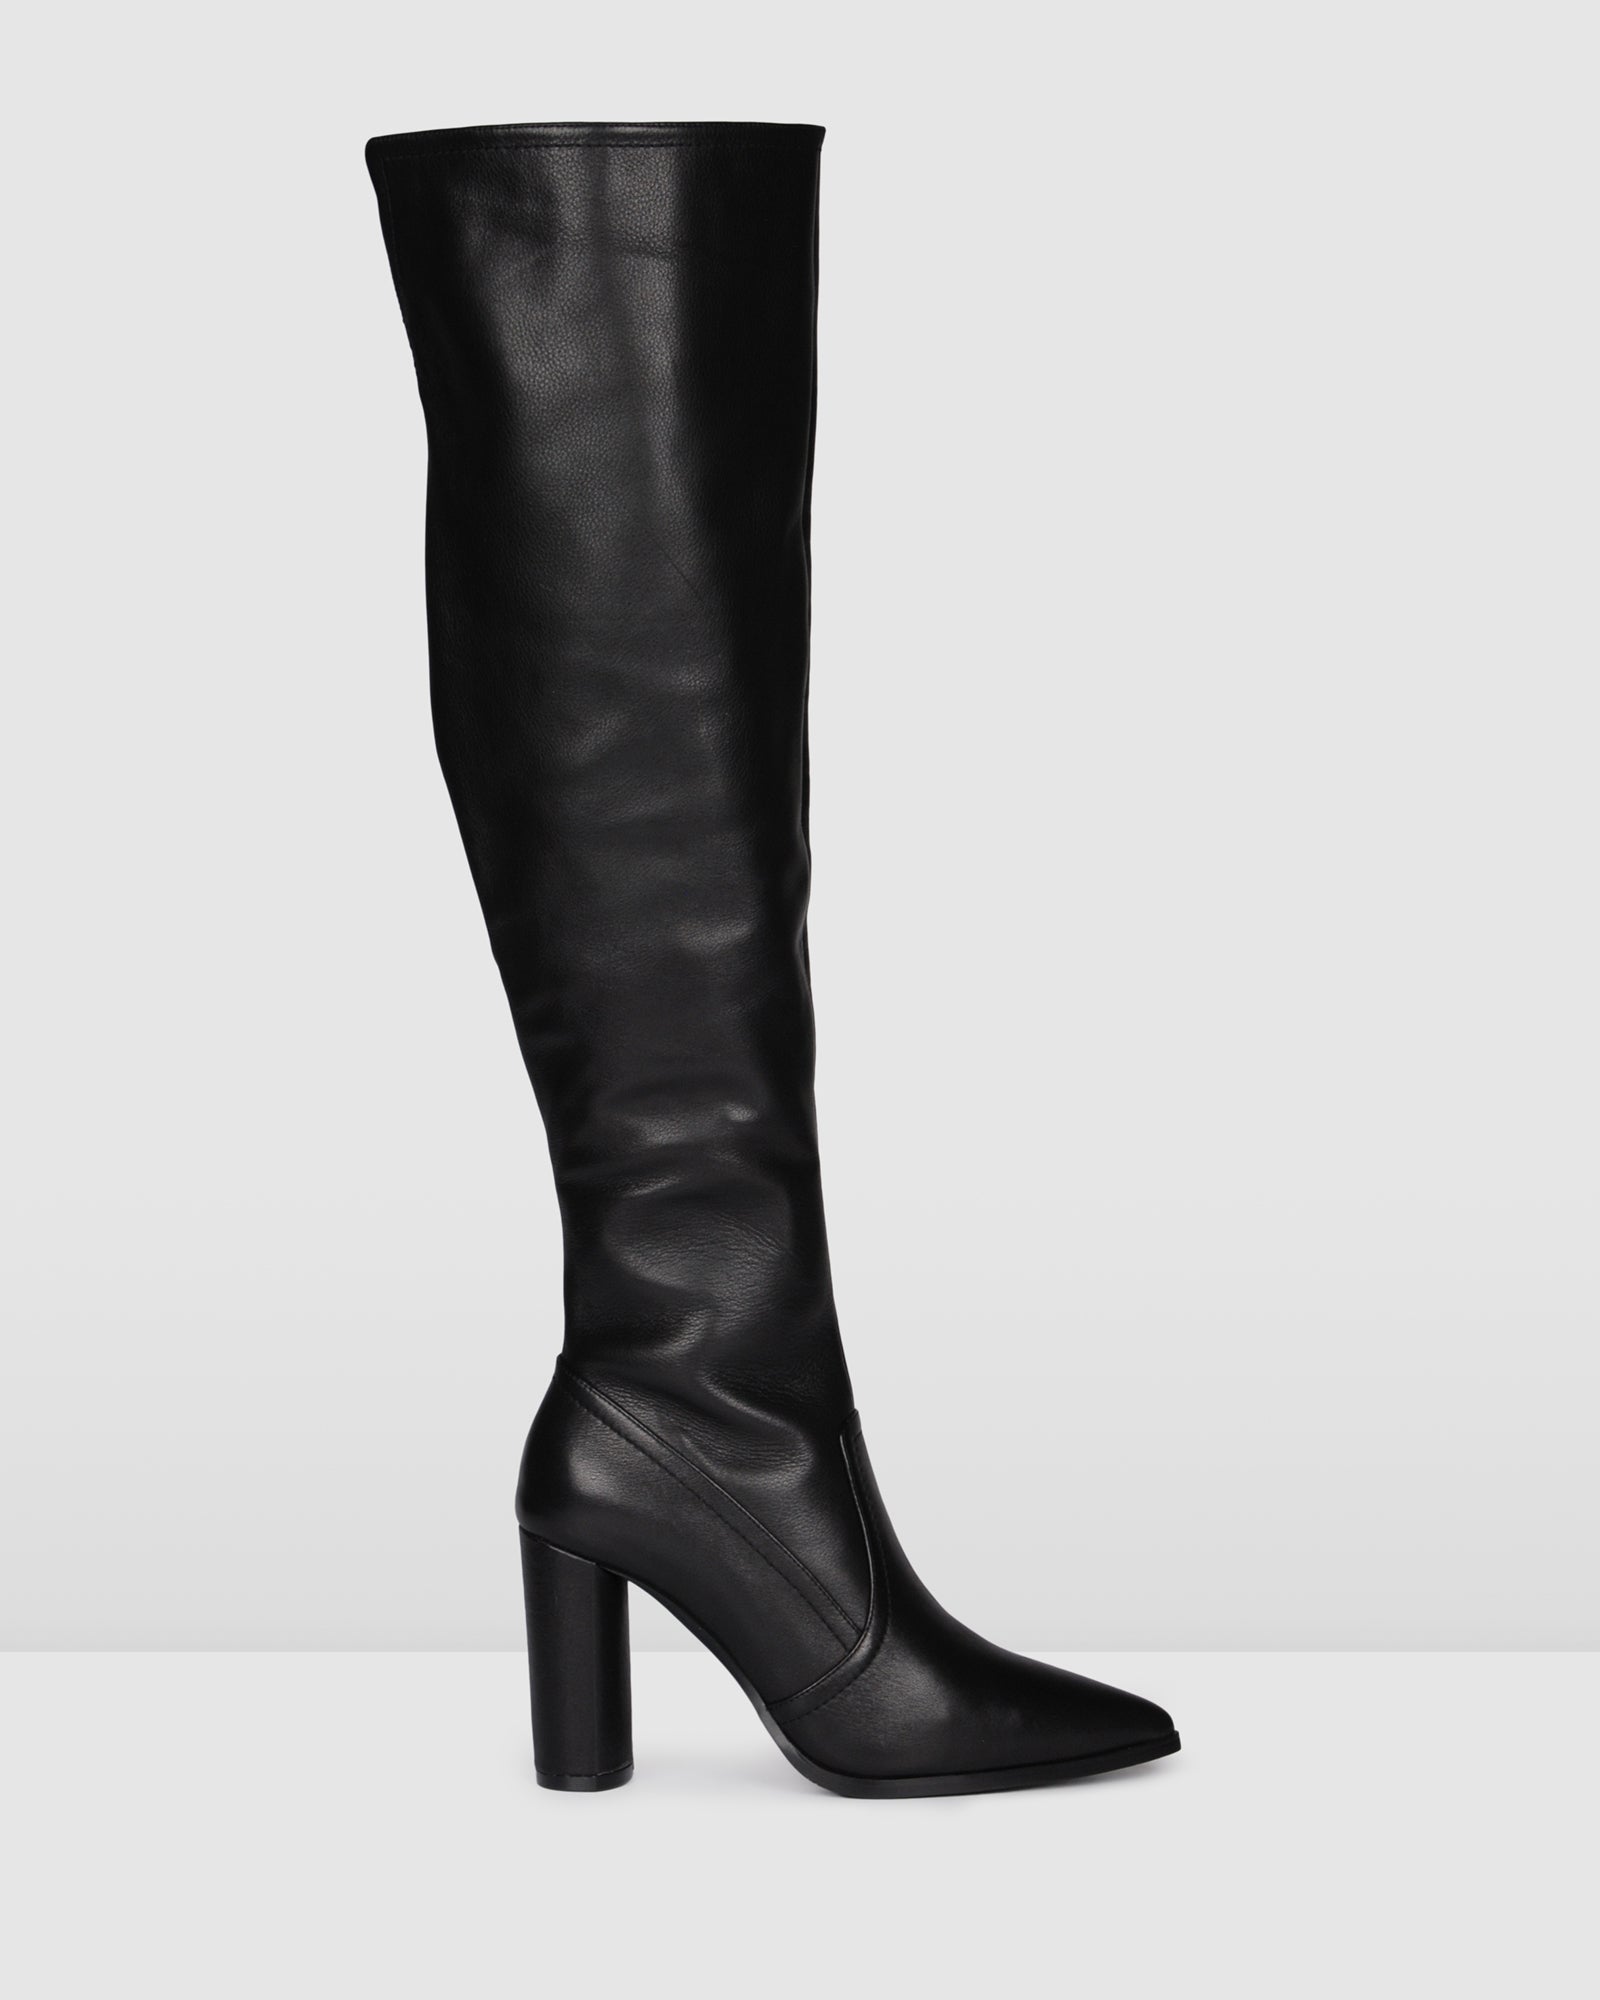 TONIC OVER THE KNEE BOOTS BLACK LEATHER 